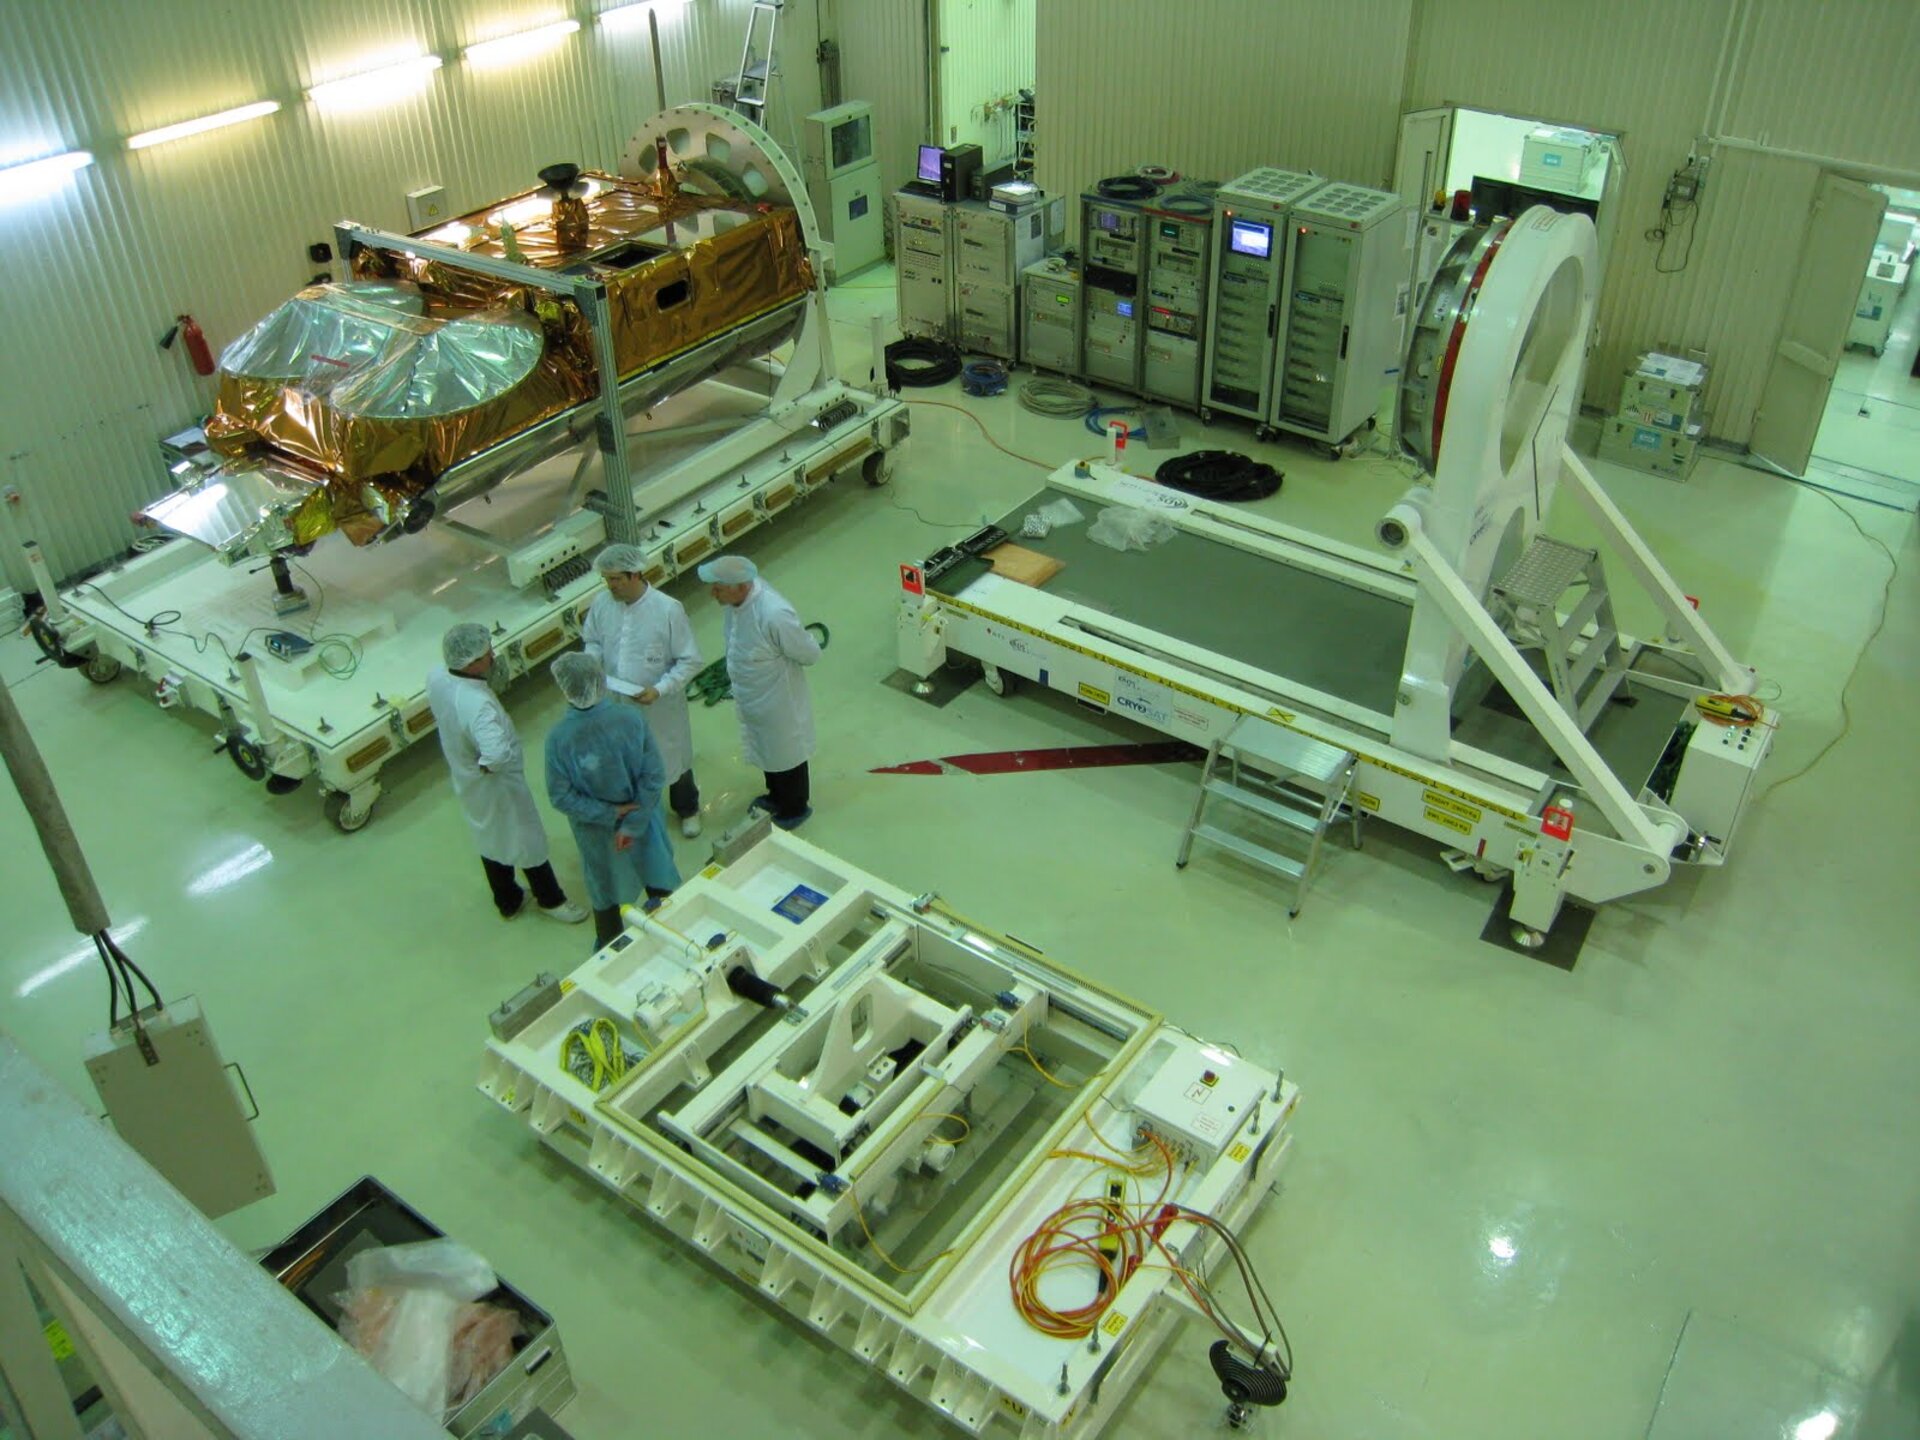 Cryosat-2 satellite and equipment in the cleanroom